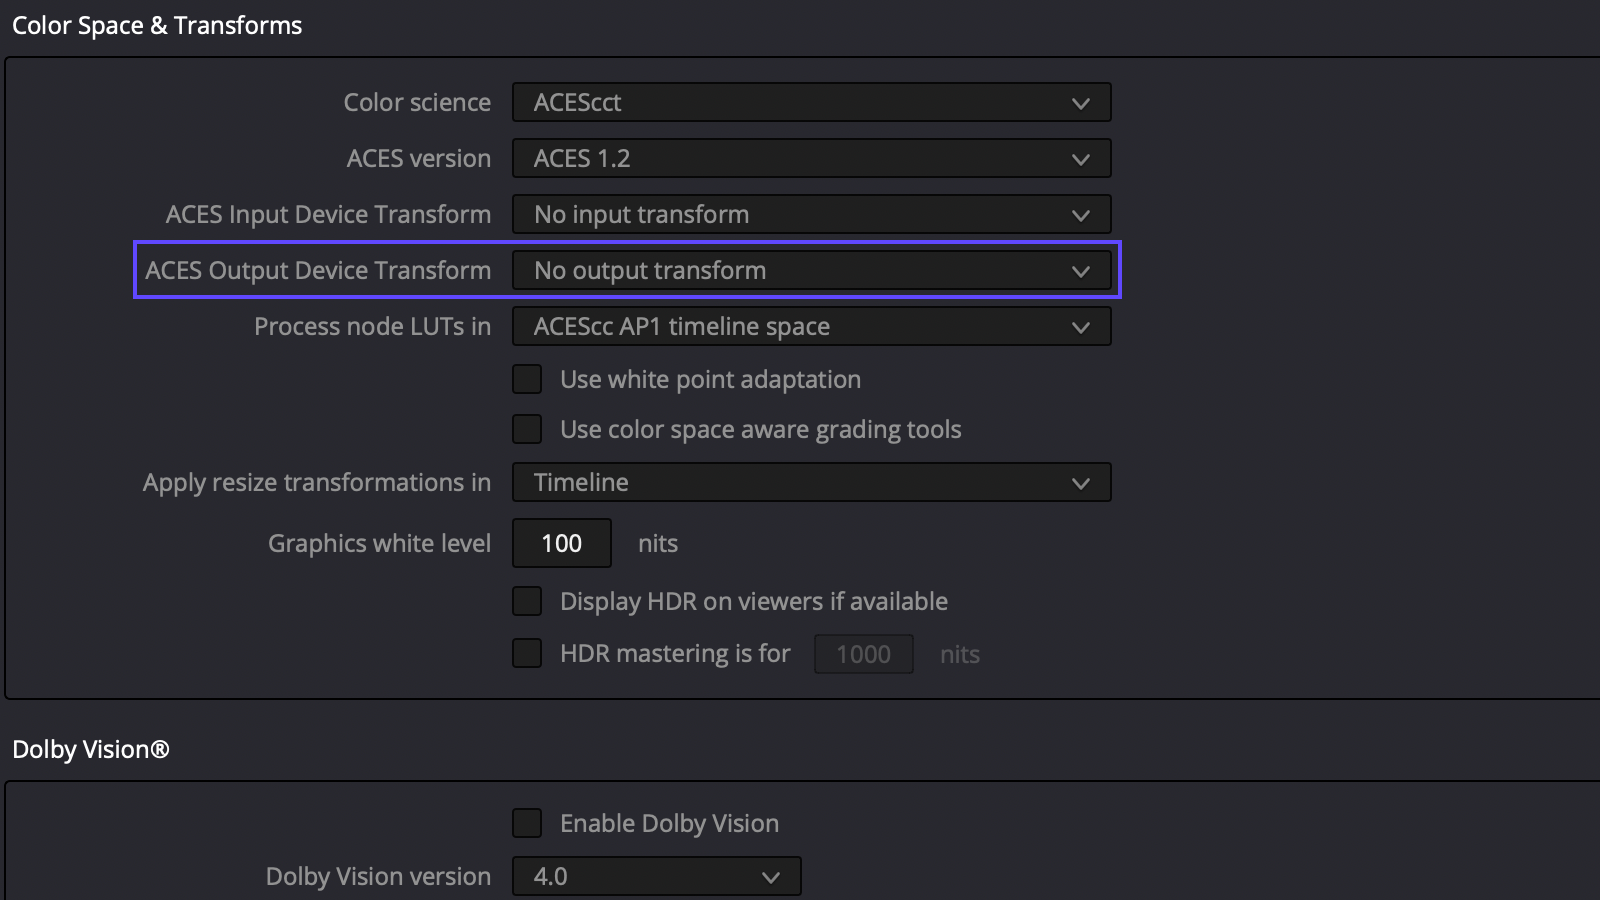 ACES Output Device Transform setting in DaVinci Resolve